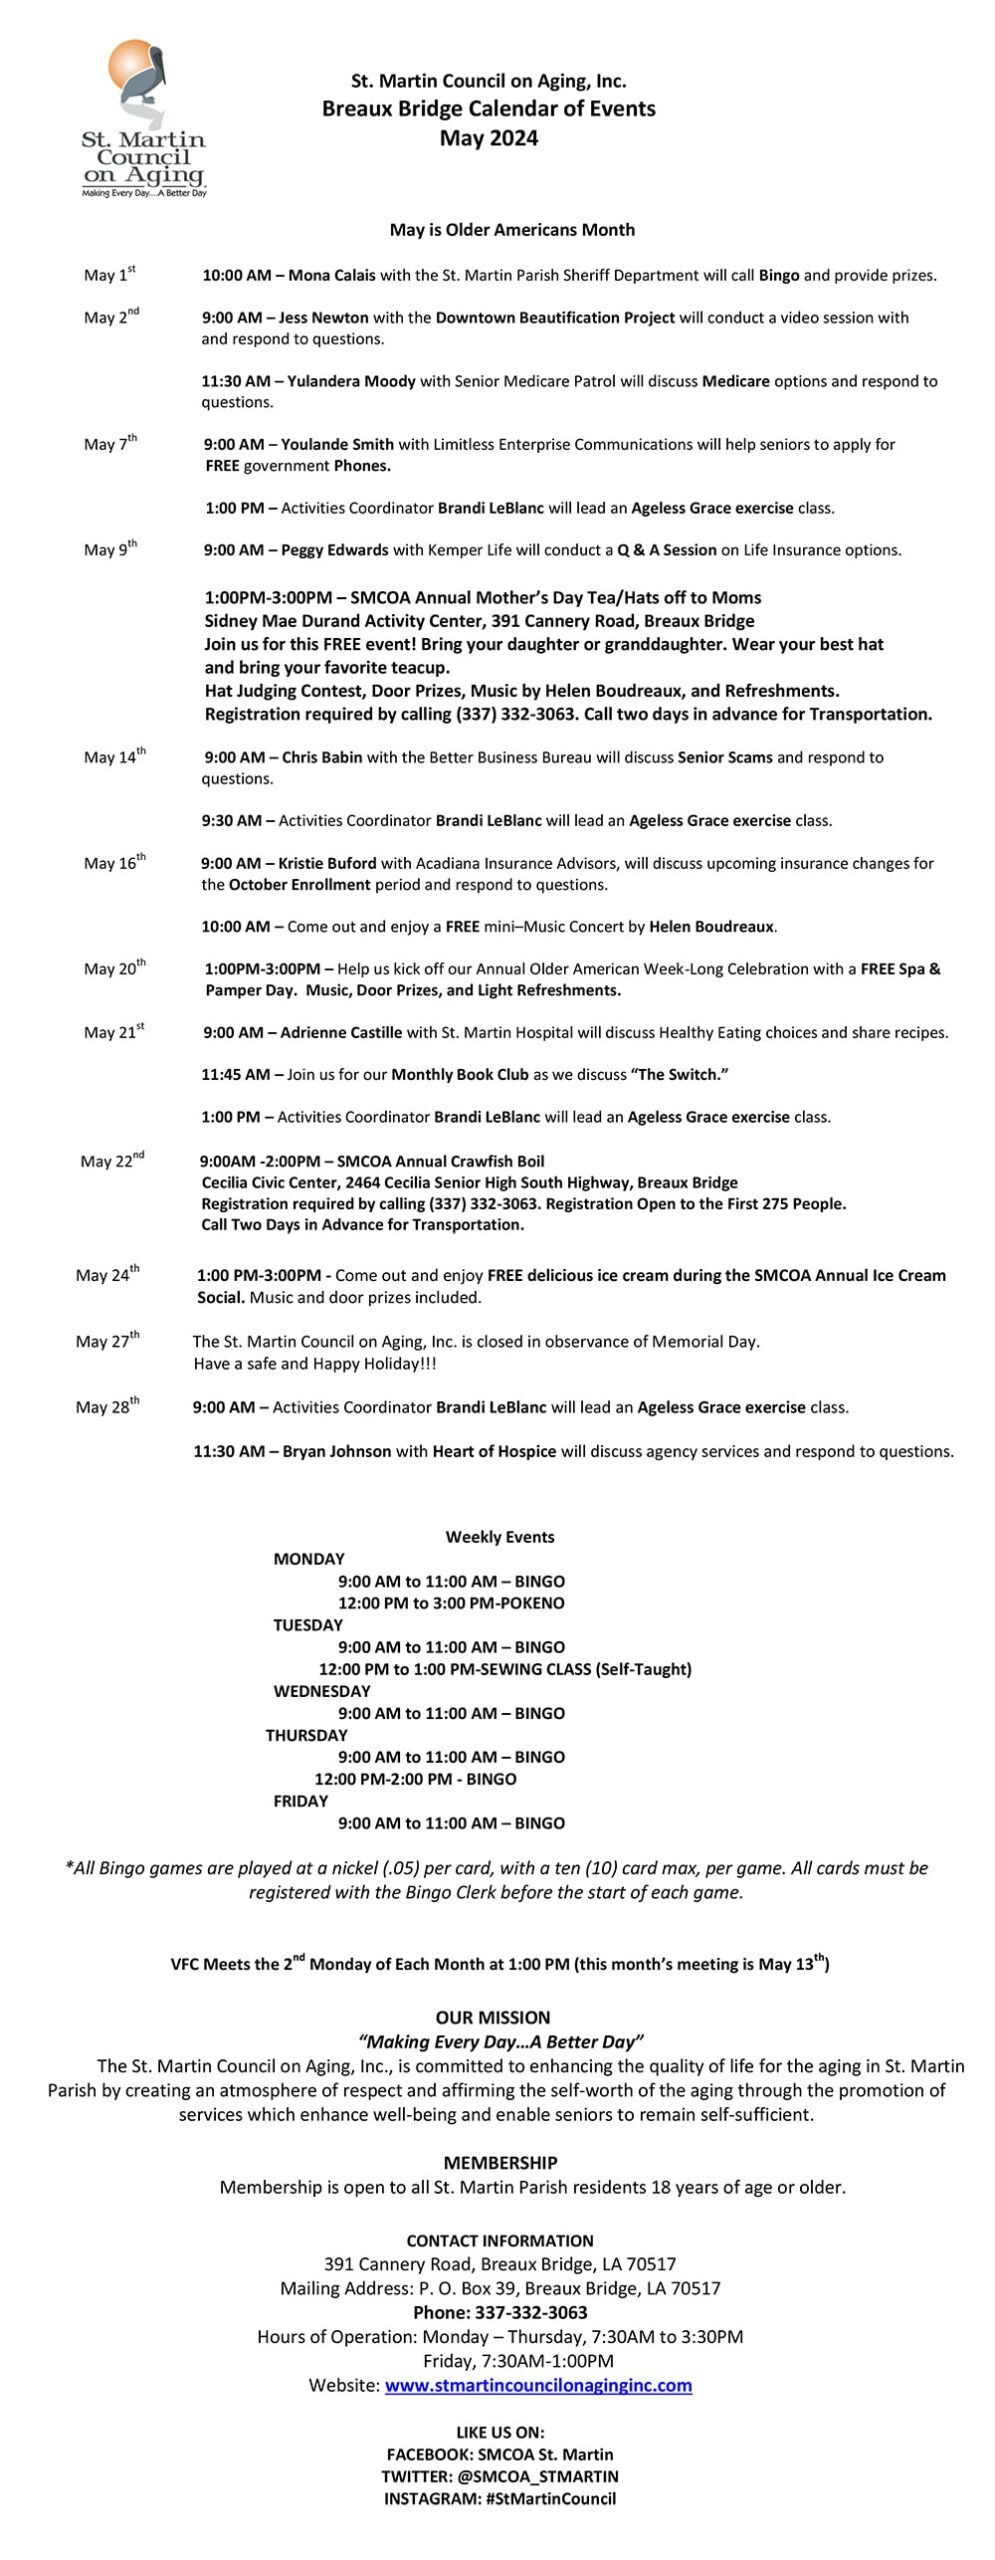 St. Martin Council on Aging, Inc.Breaux Bridge Calendar of Events May 2024